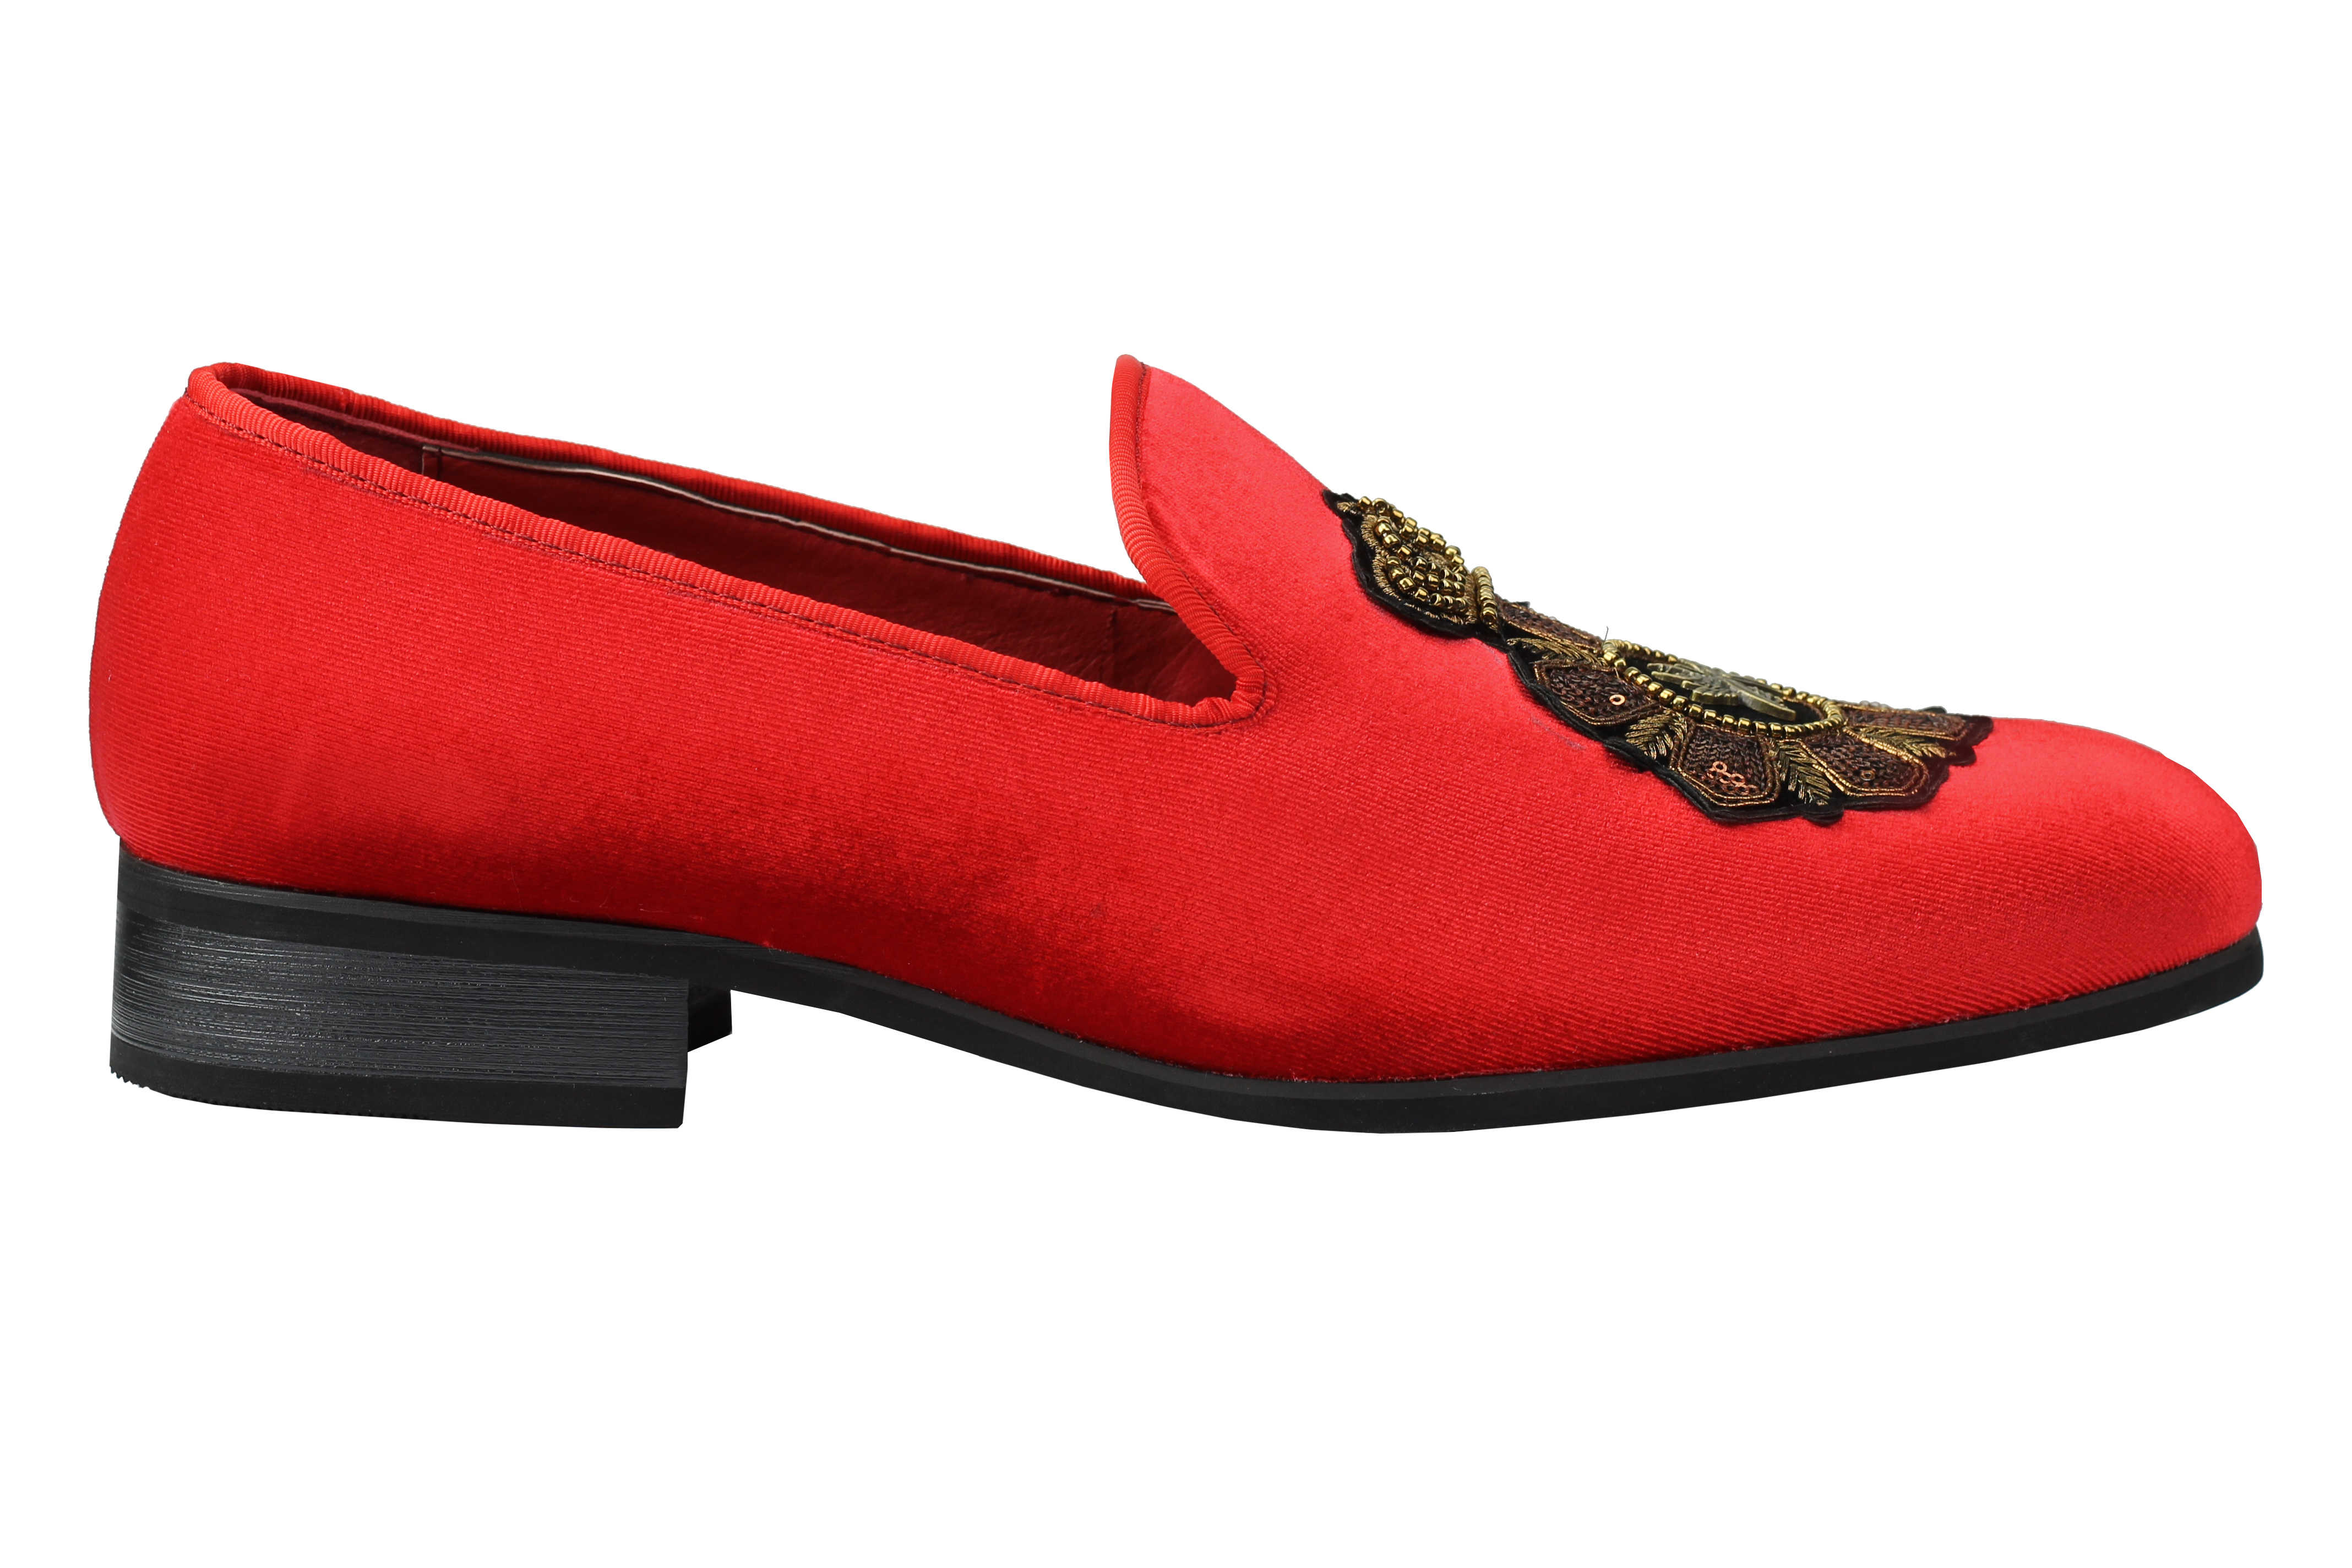 Mens Velvet Loafers Bee Crown Embroidered Vintage Dress Shoes Slip On Slippers Red